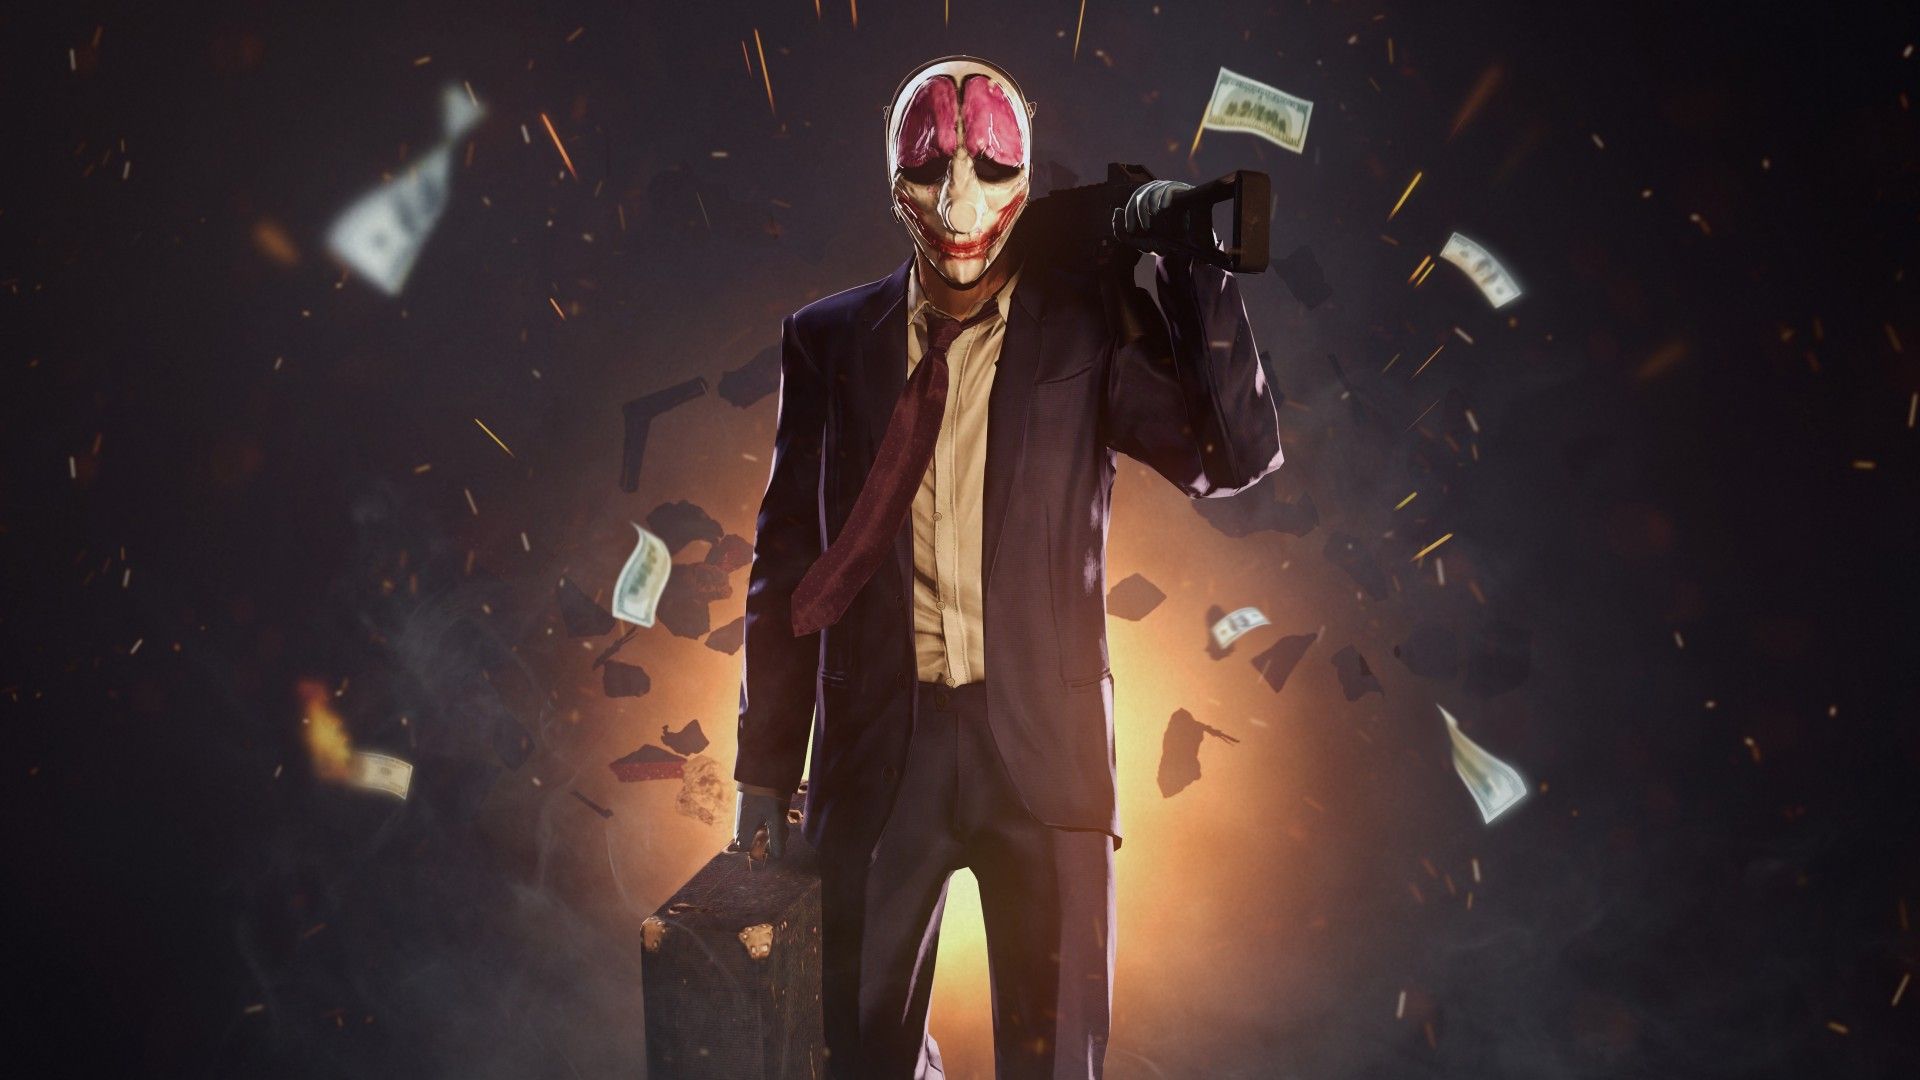 Wallpaper Payday game, shooter, stealth, FPS, Houston, clown, suit, rifle, money, robbery, bank, Games